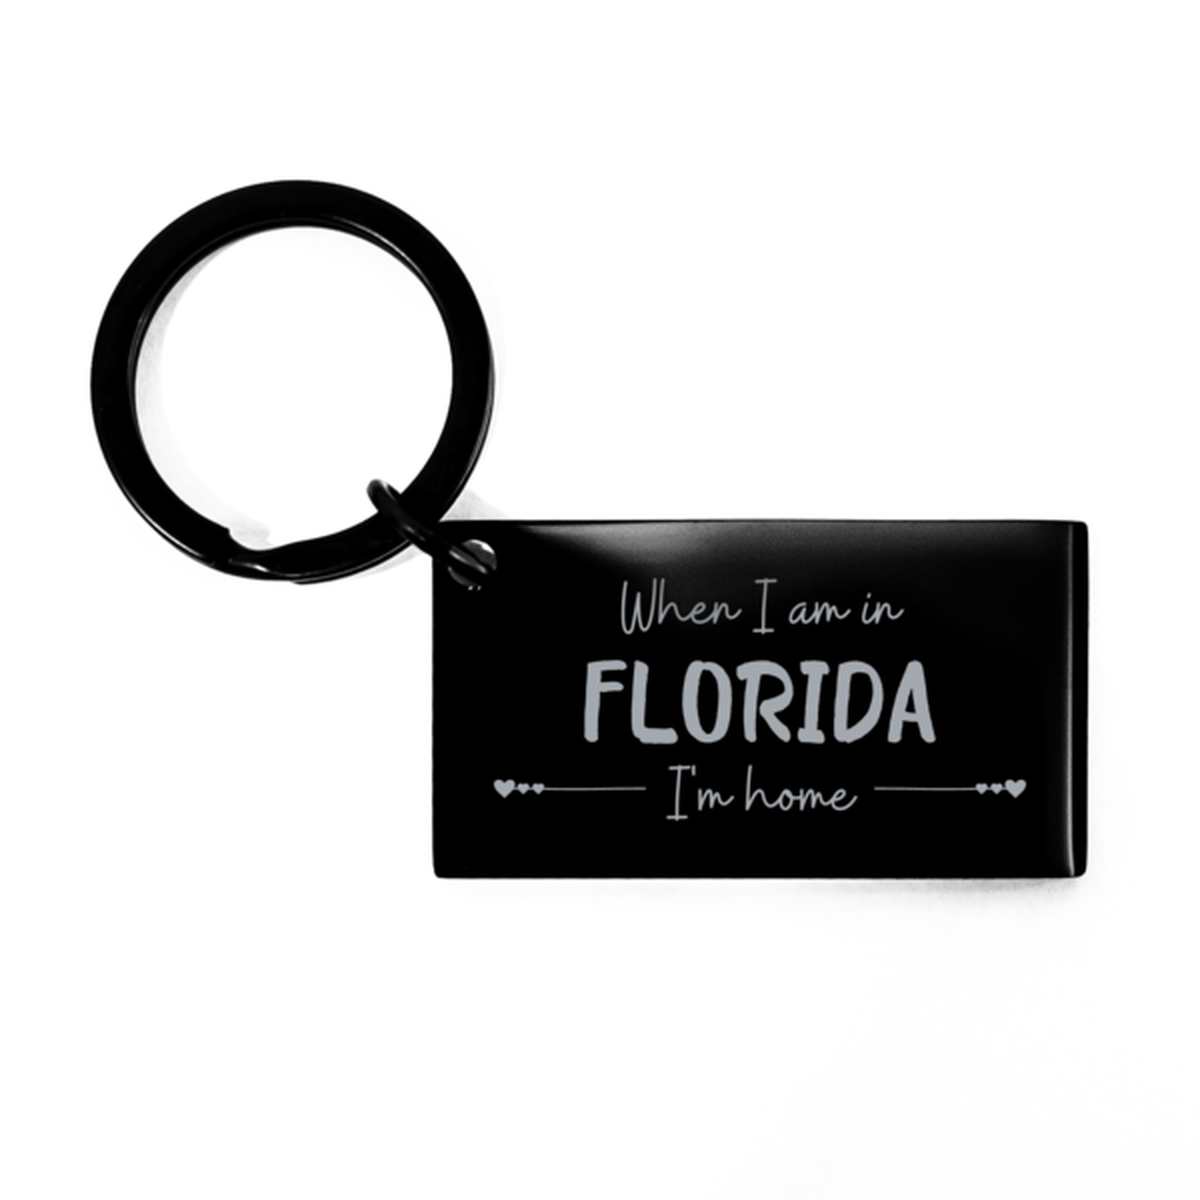 When I am in Florida I'm home Keychain, Cheap Gifts For Florida, State Florida Birthday Gifts for Friends Coworker